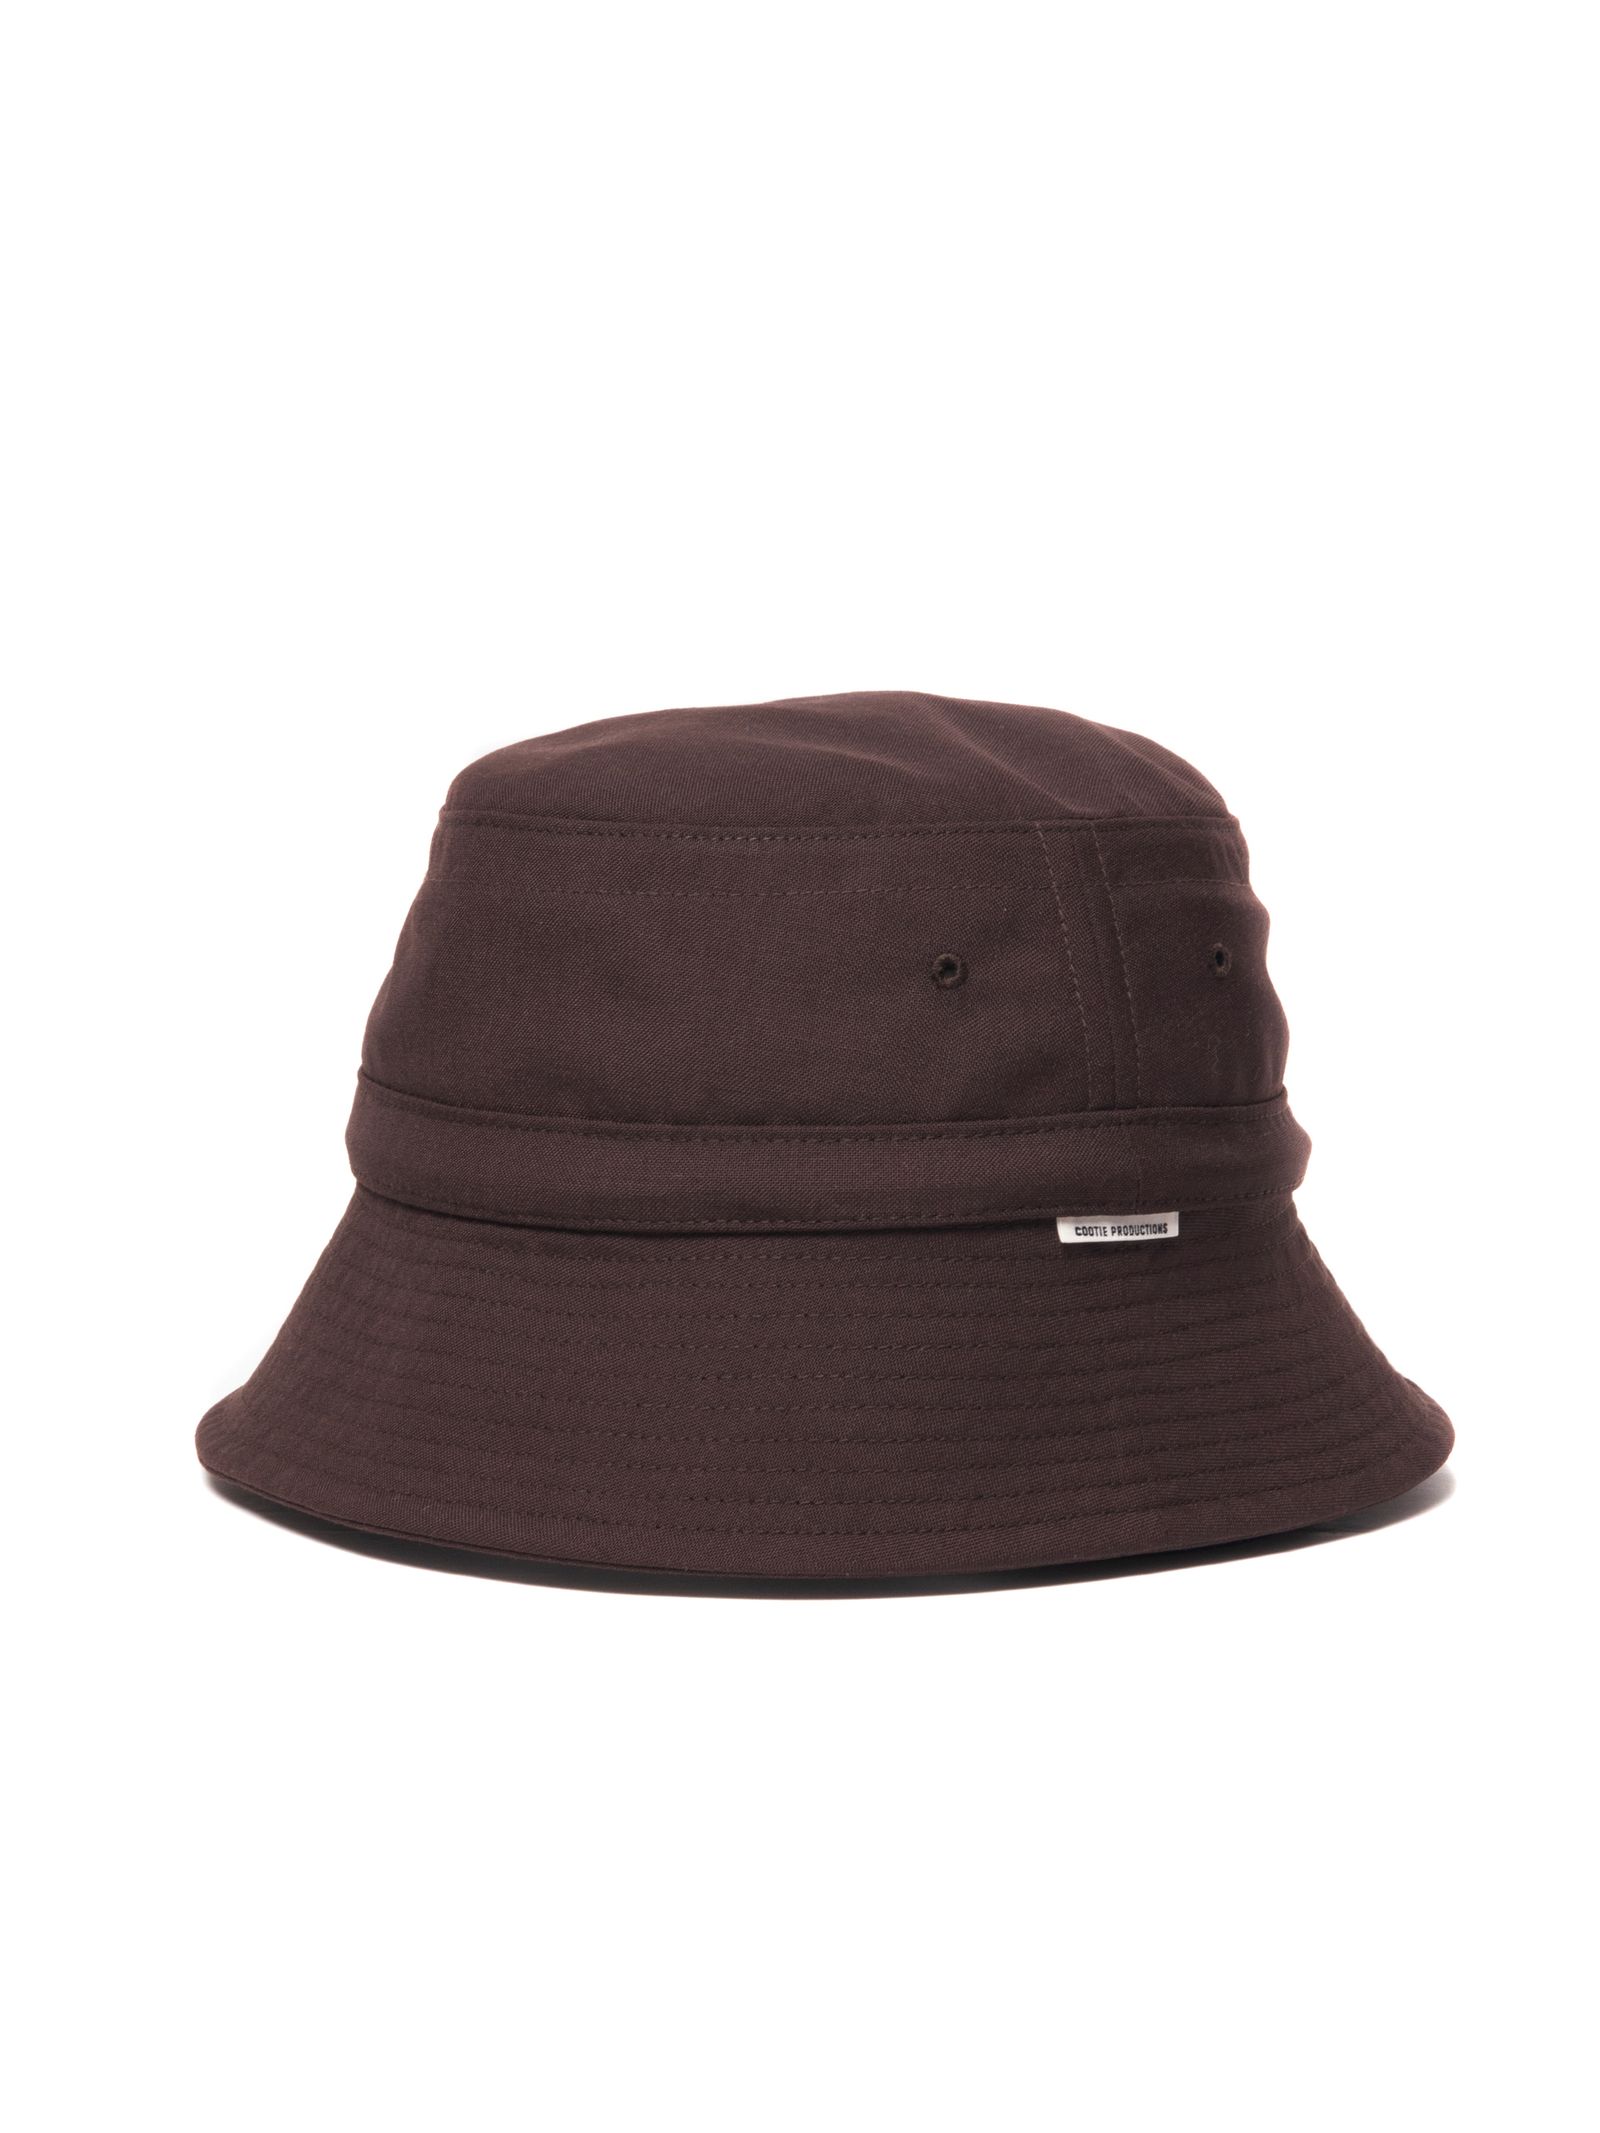 COOTIE PRODUCTIONS - T/W BUCKET HAT (BROWN) / ポリウール バケット 